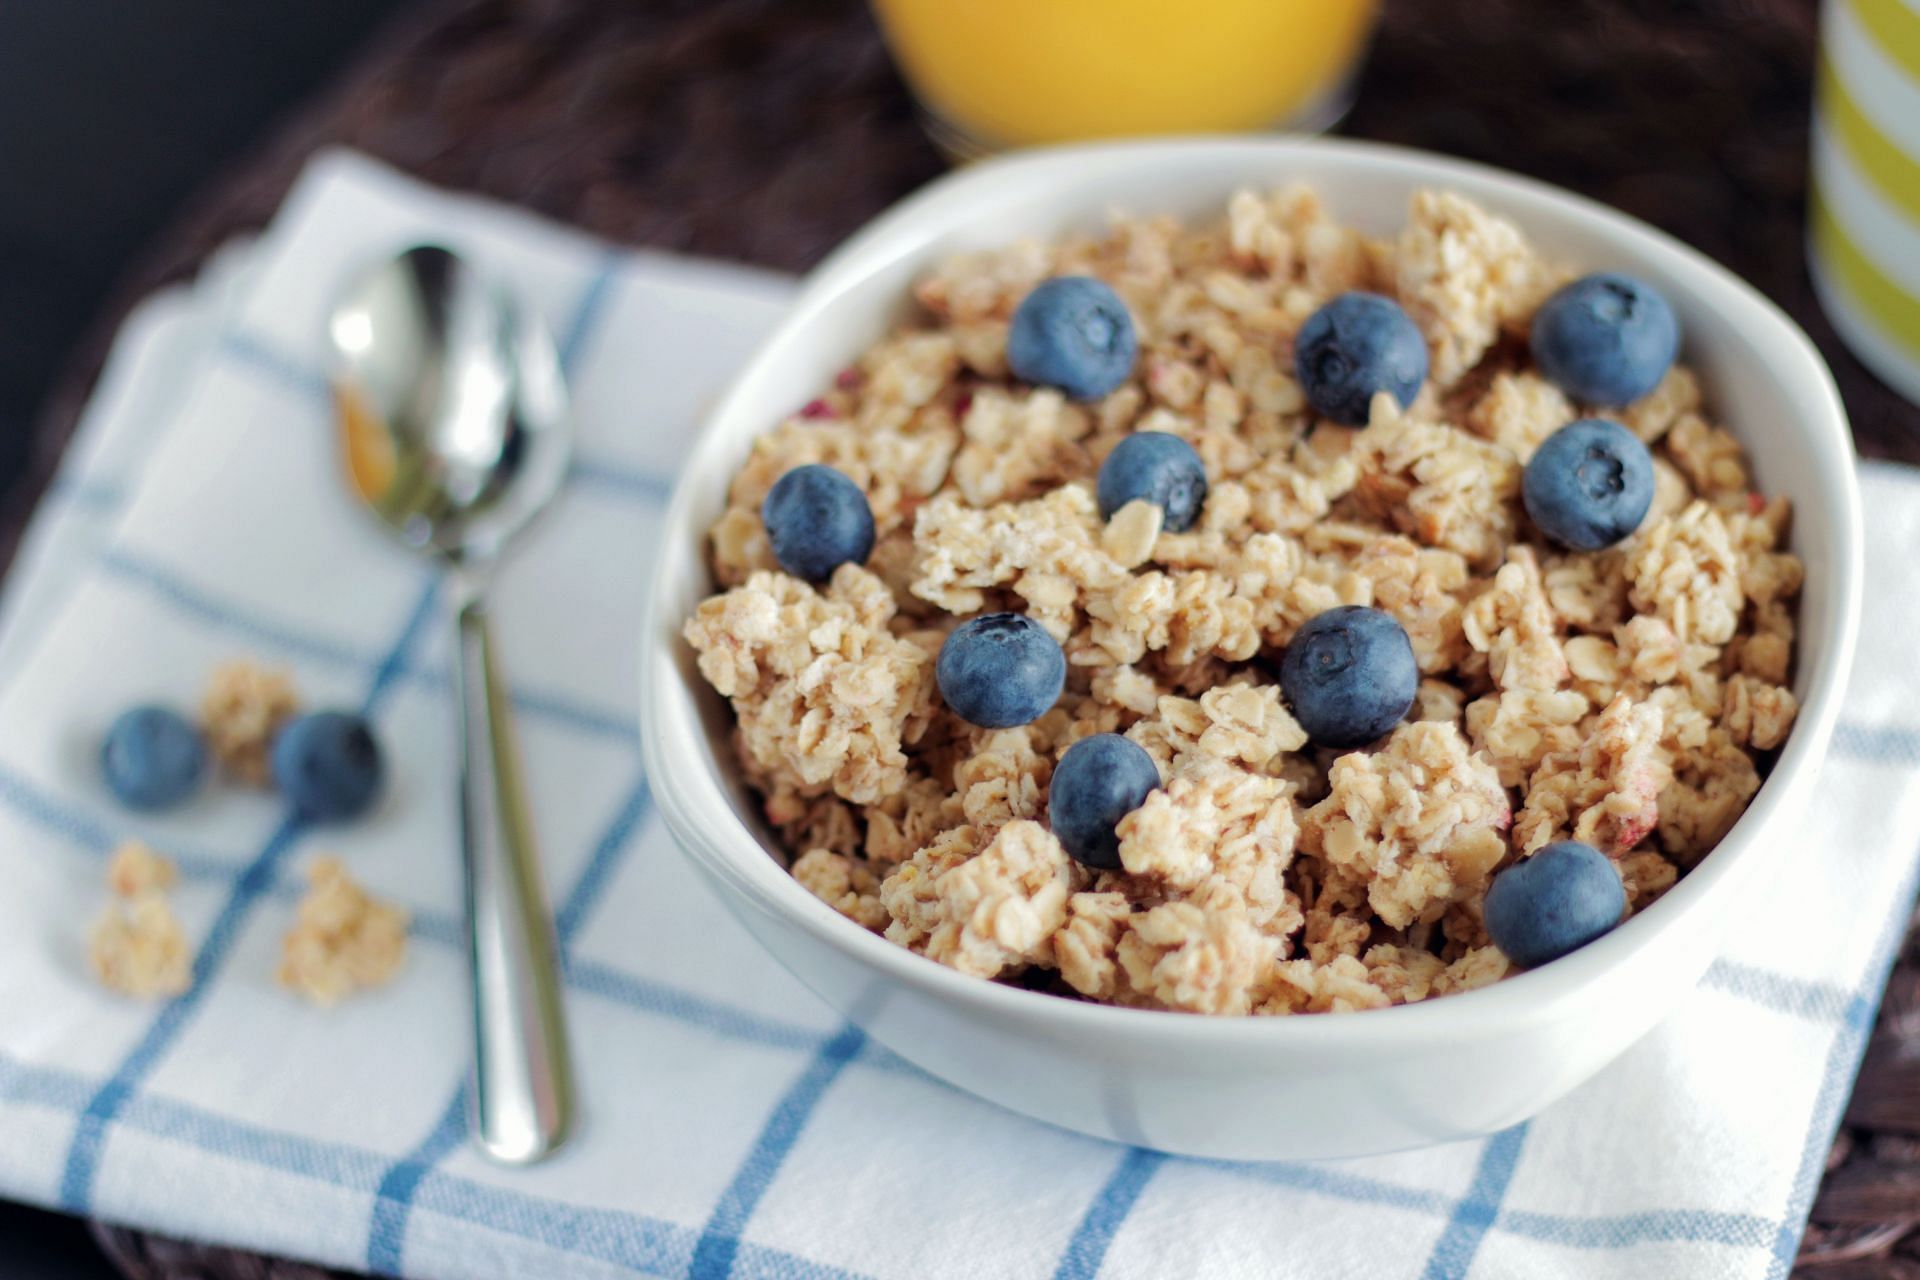 Many bowls of cereal are fortified with niacin. Iimage via Pexels)